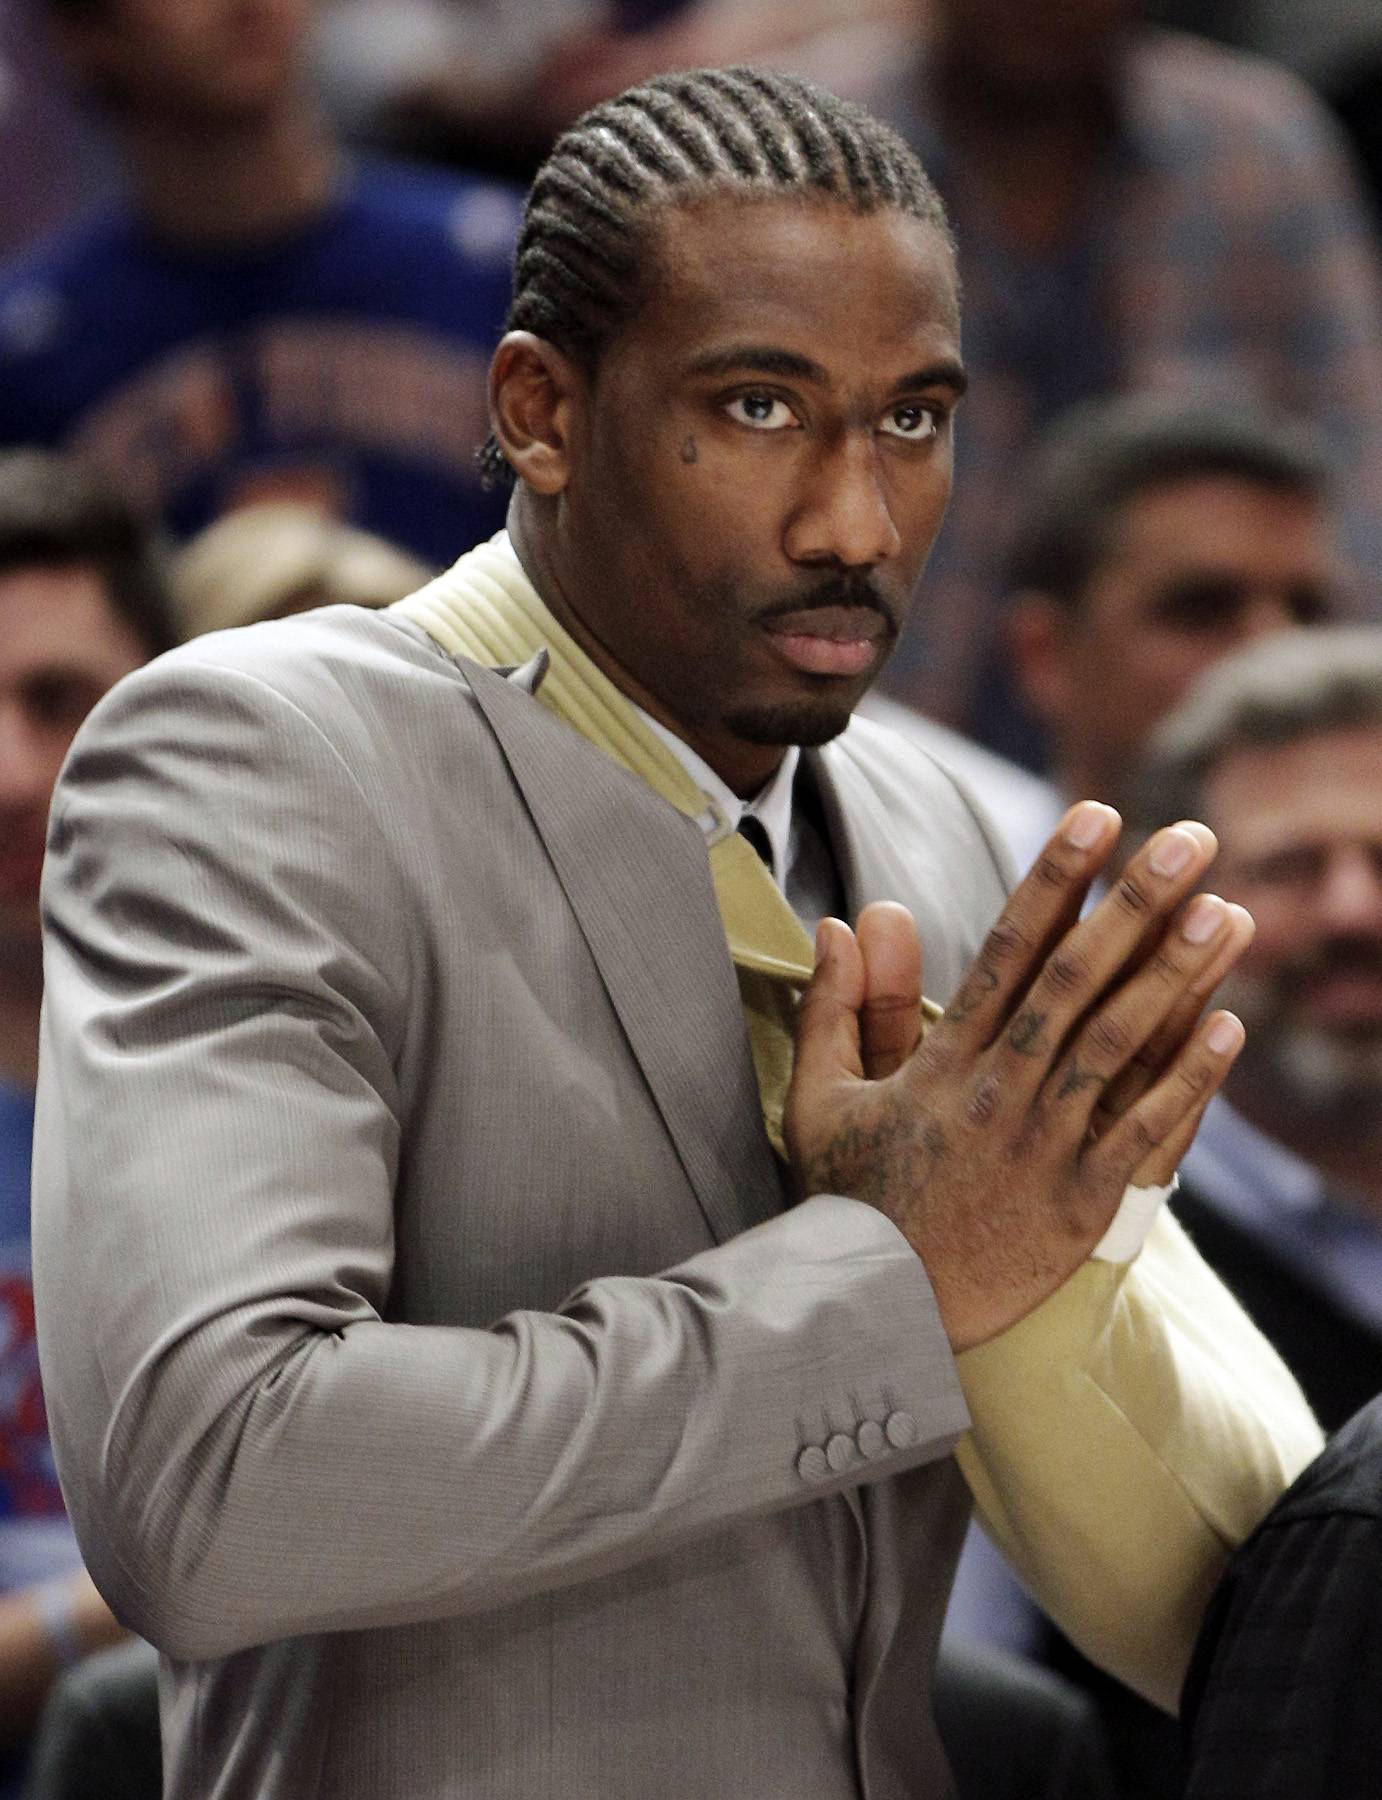 Amar'e Stoudemire Fined for Homophobic Tweet - On Tuesday, the NBA fined Amar'e Stoudemire $50,000 for tweeting a gay slur to a fan who questioned the basketball player's performance last season. In a statement, the Knicks star said he was a &quot;huge supporter of civil rights for all people and added, &quot;I should have known better and there is no excuse.&quot;&nbsp;(Photo: Kathy Willens/ AP Photo)